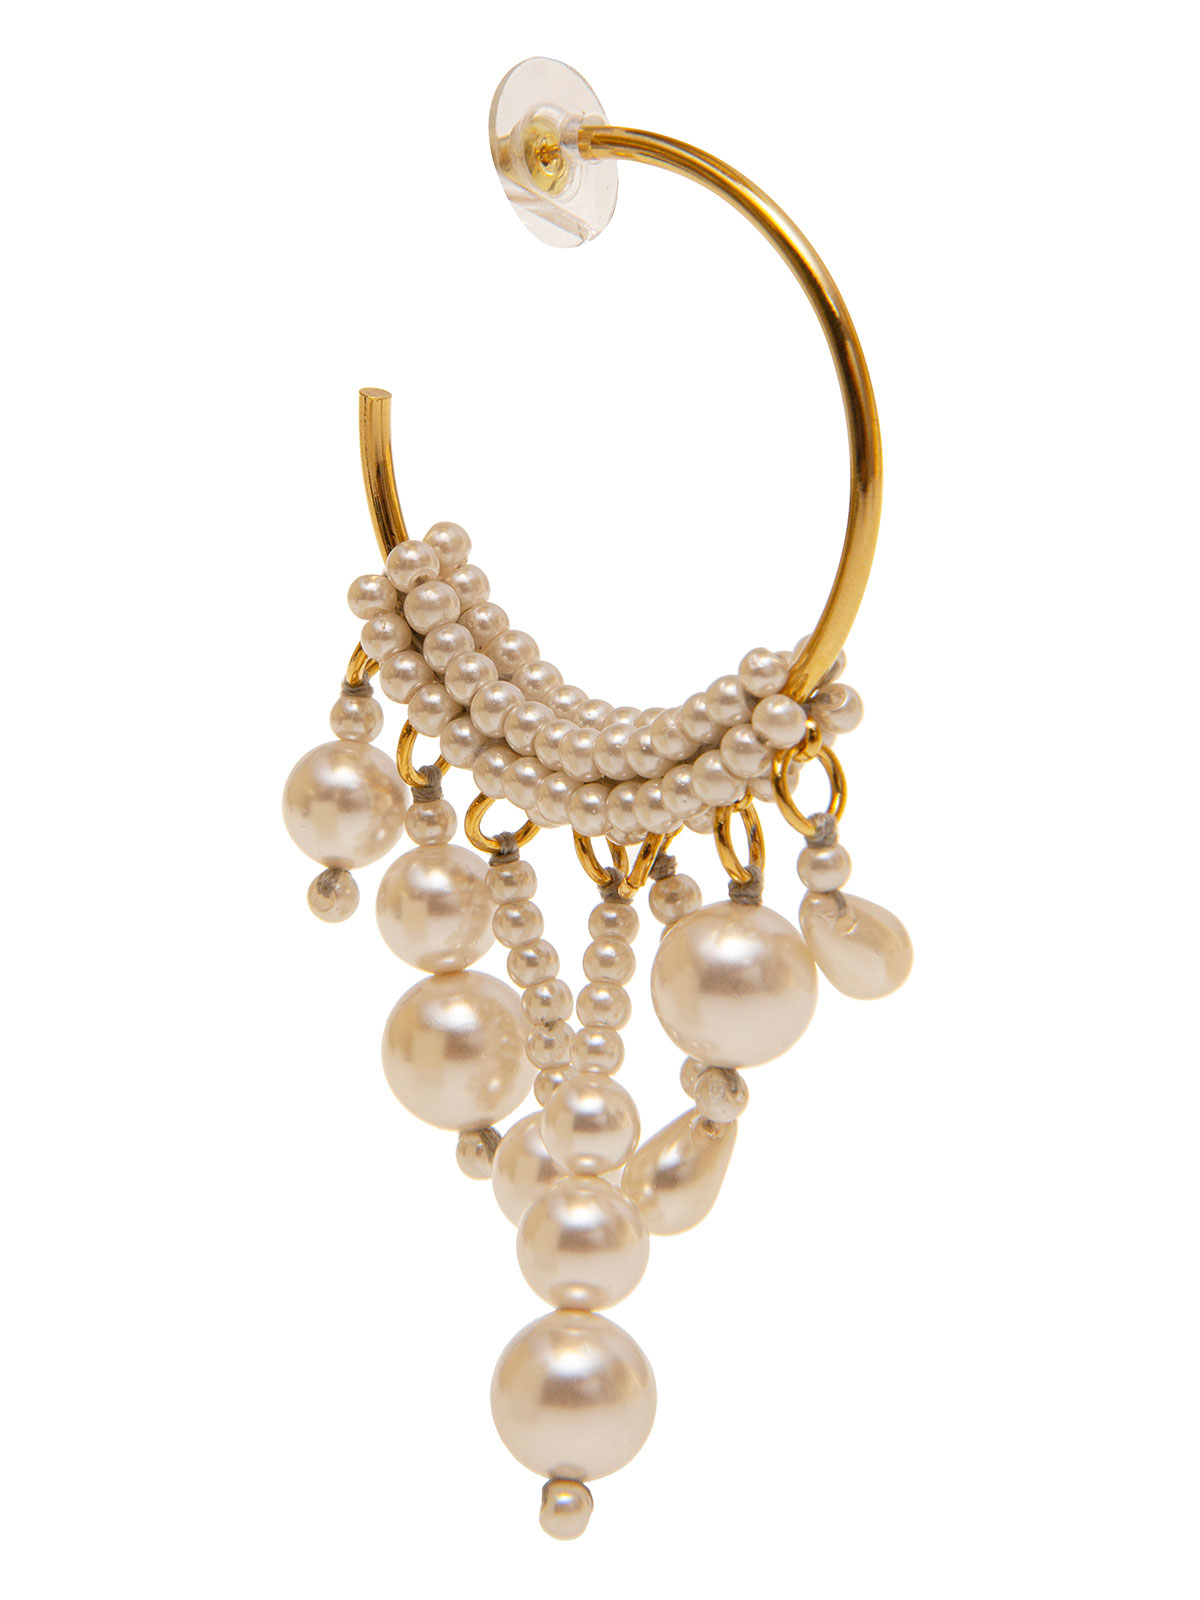 Hoop earrings with pendent beads and pearls